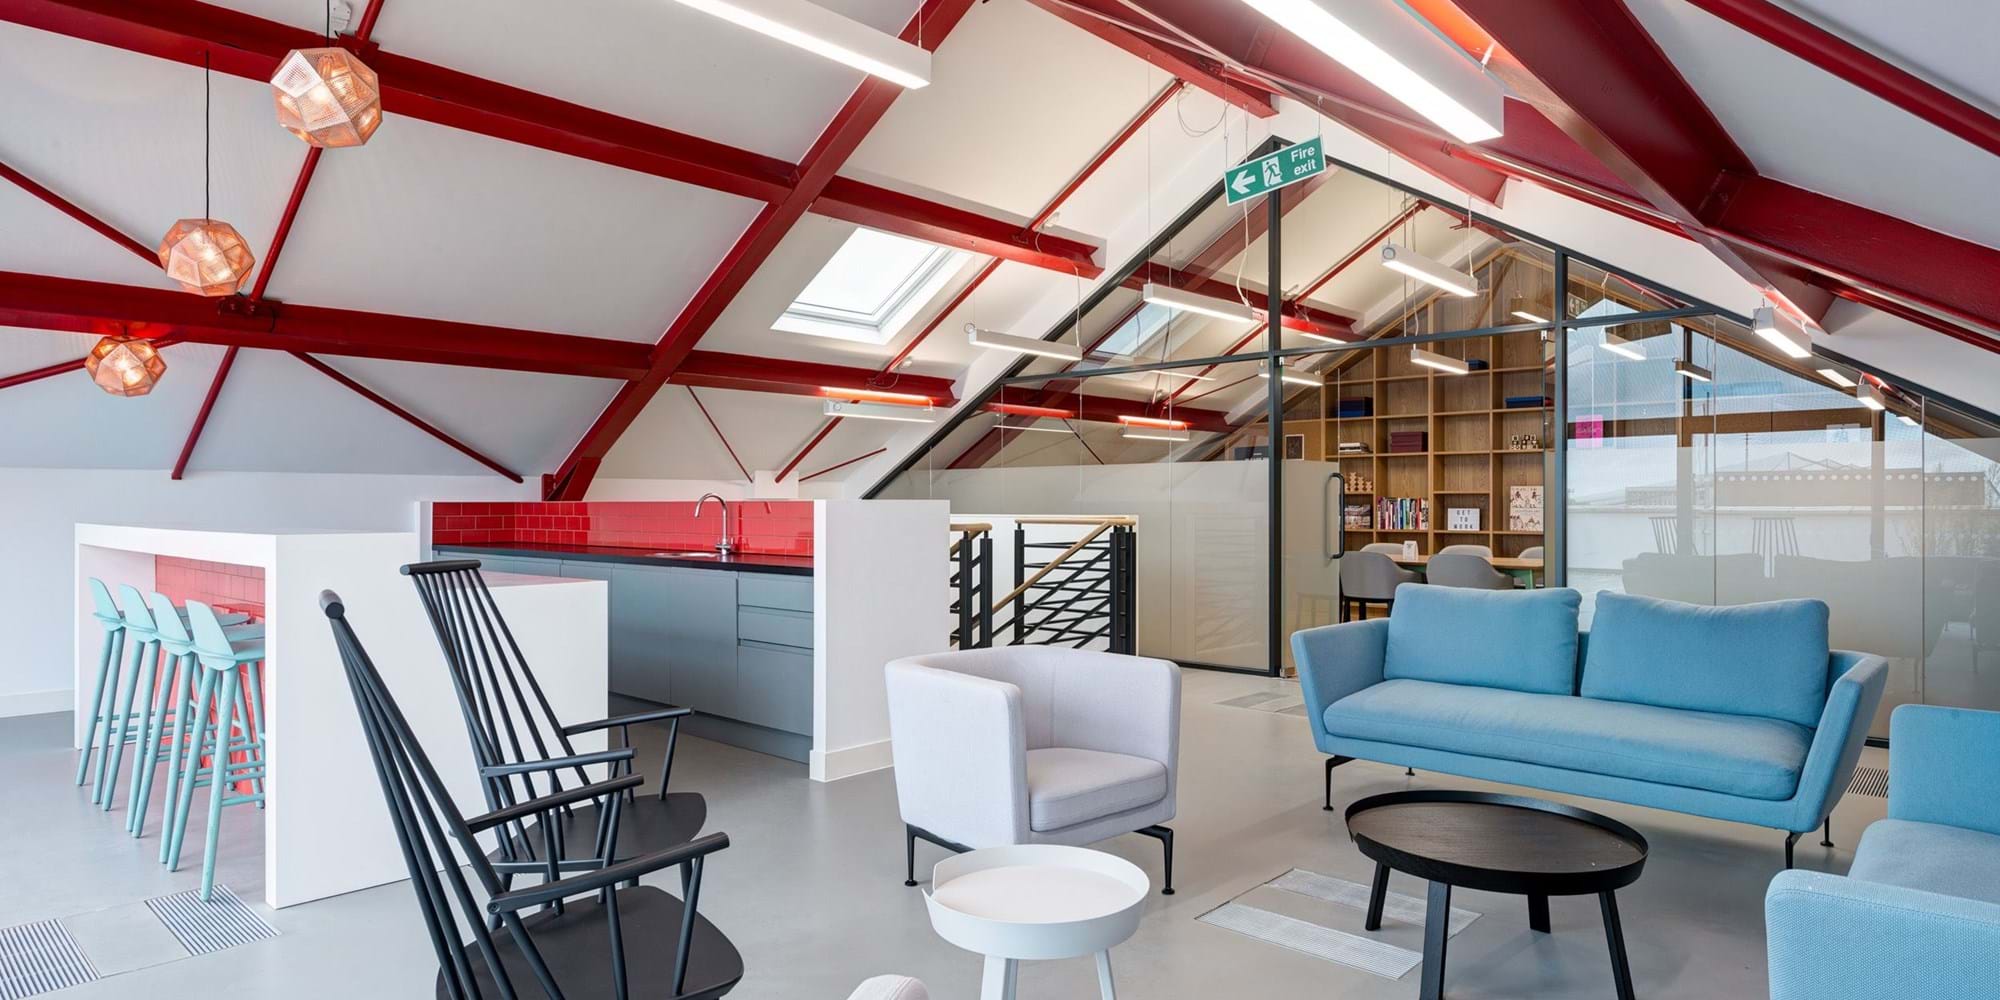 Modus Workspace office design, fit out and refurbishment - Spaces - Brighton - Spaces Brighton 31 highres sRGB.jpg